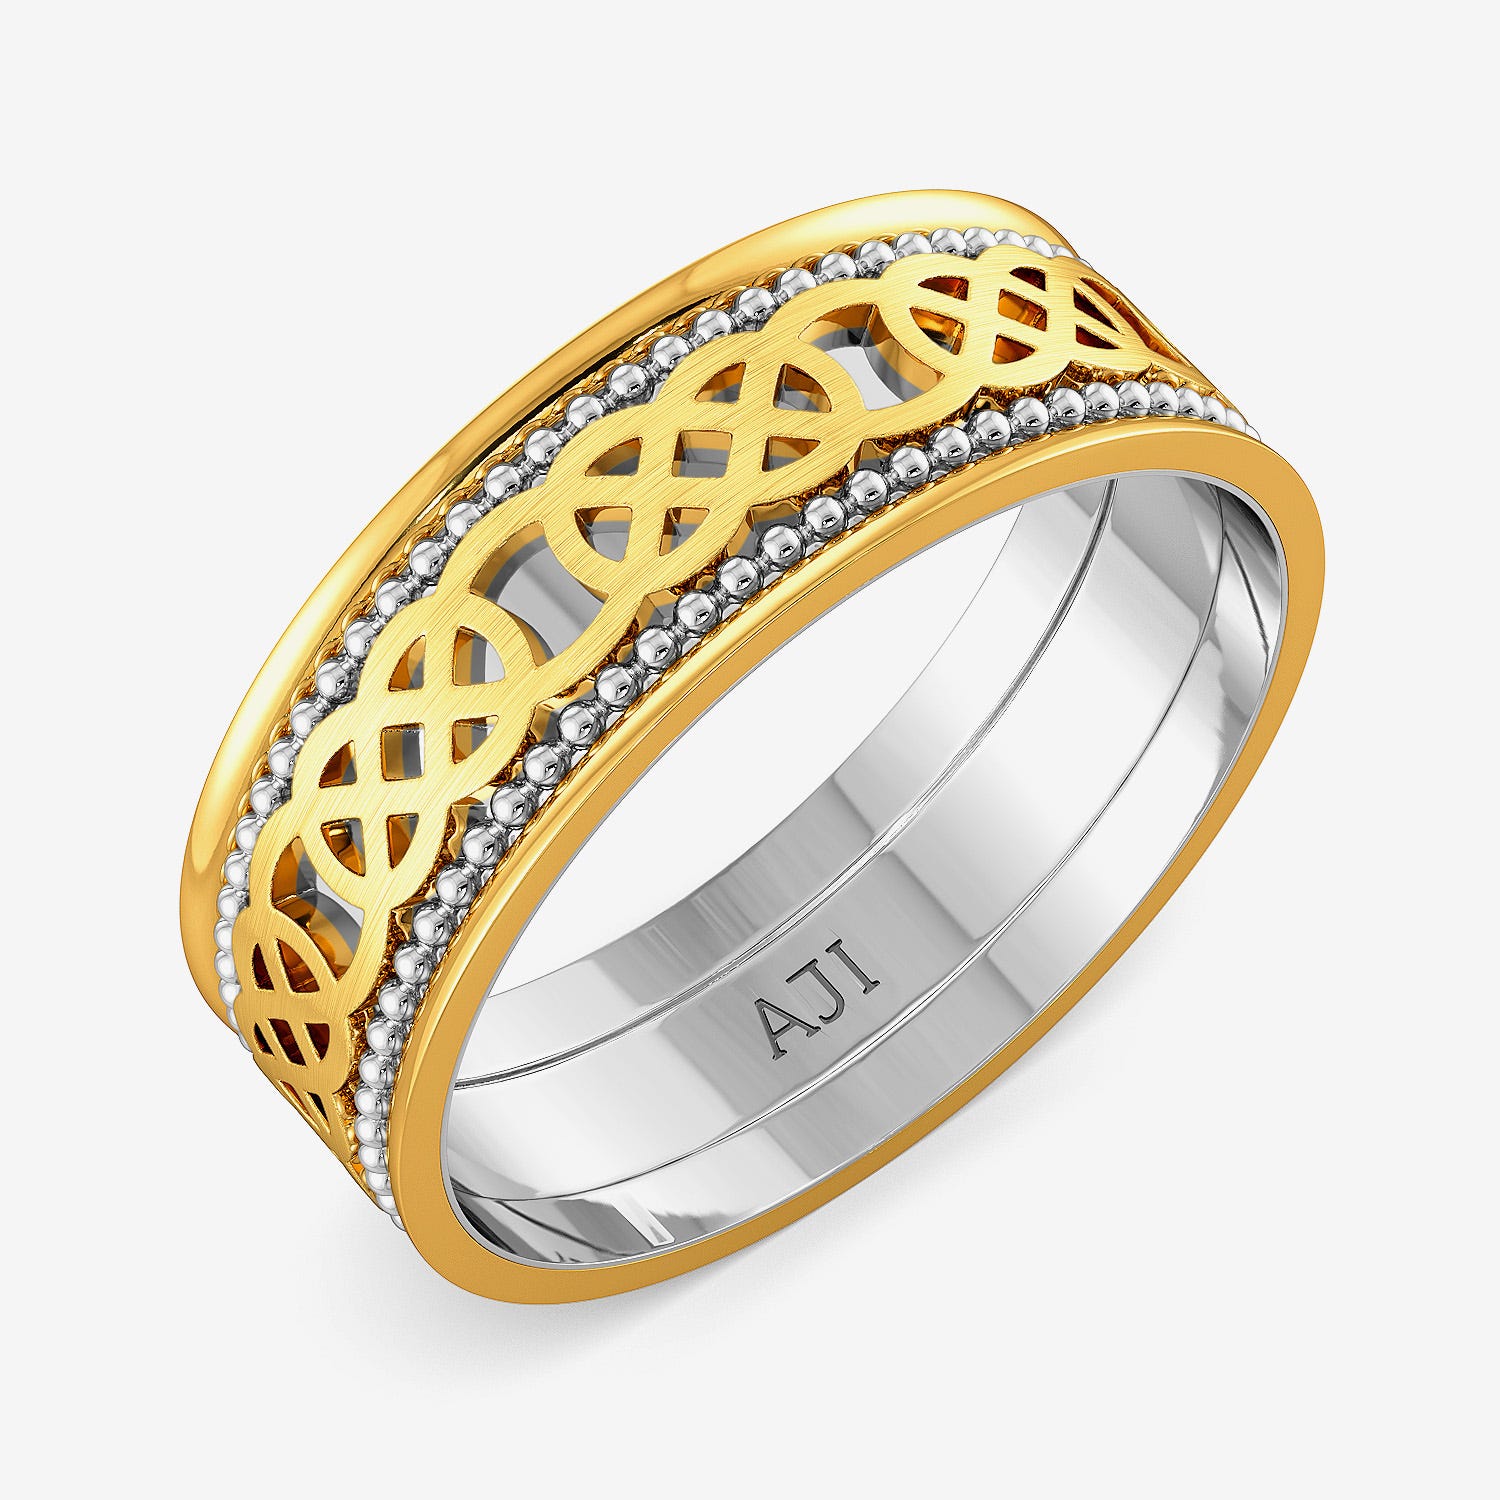 Buy quality New Fancy Design Gold Ring For Men in Ahmedabad-saigonsouth.com.vn